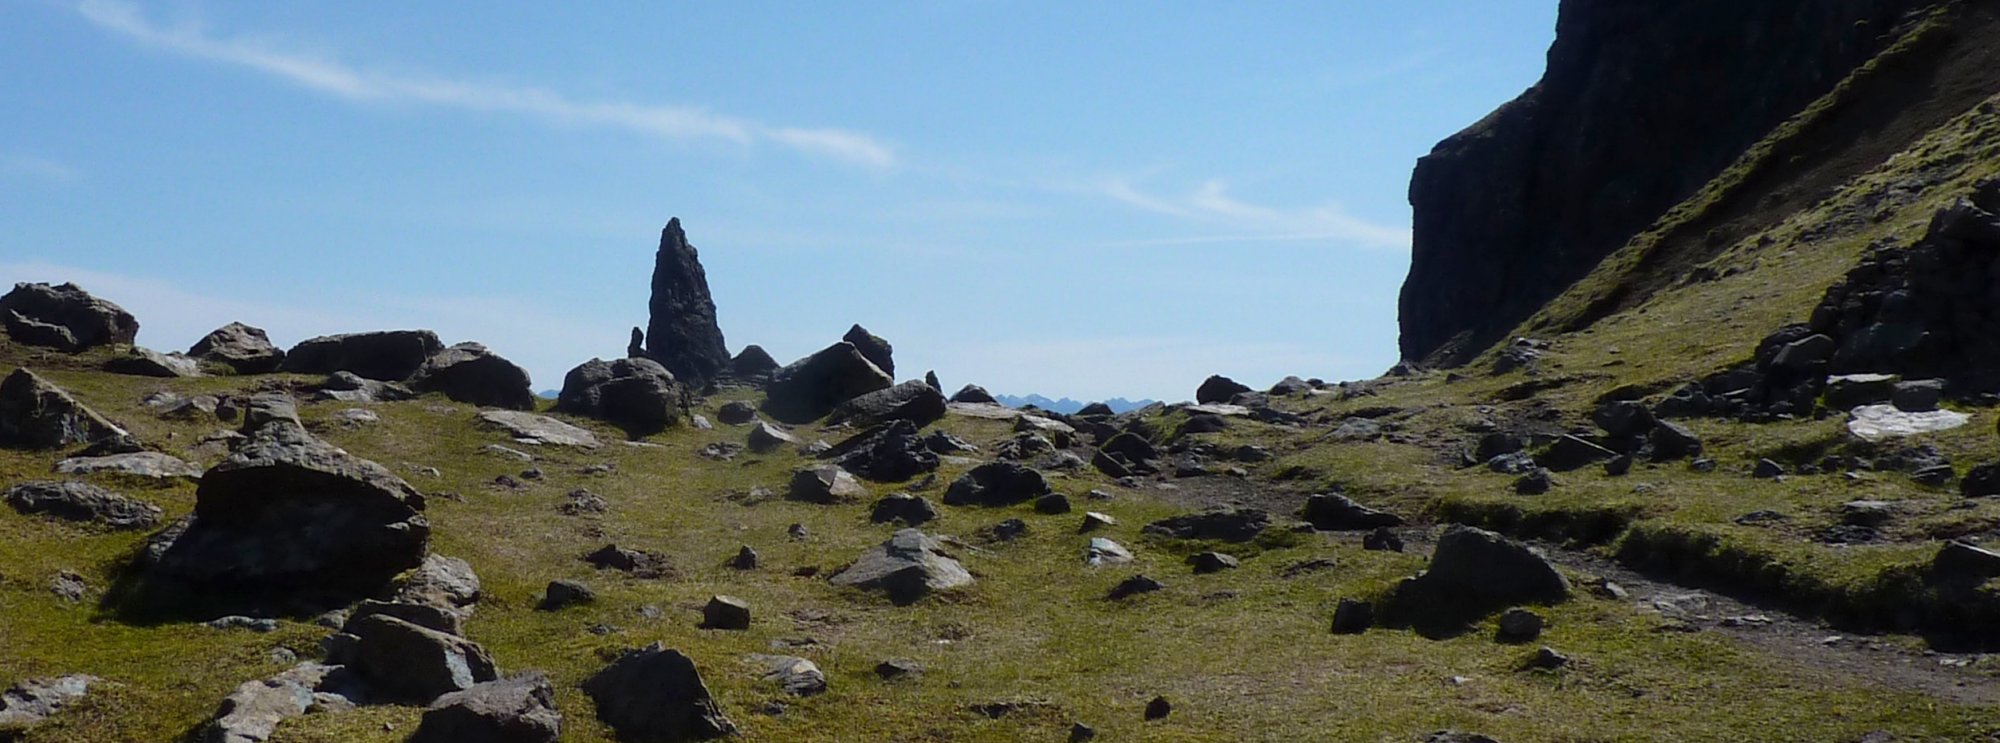 An unusual view of the Old Man of Storr - just the tip sticking out from the skyline ahead